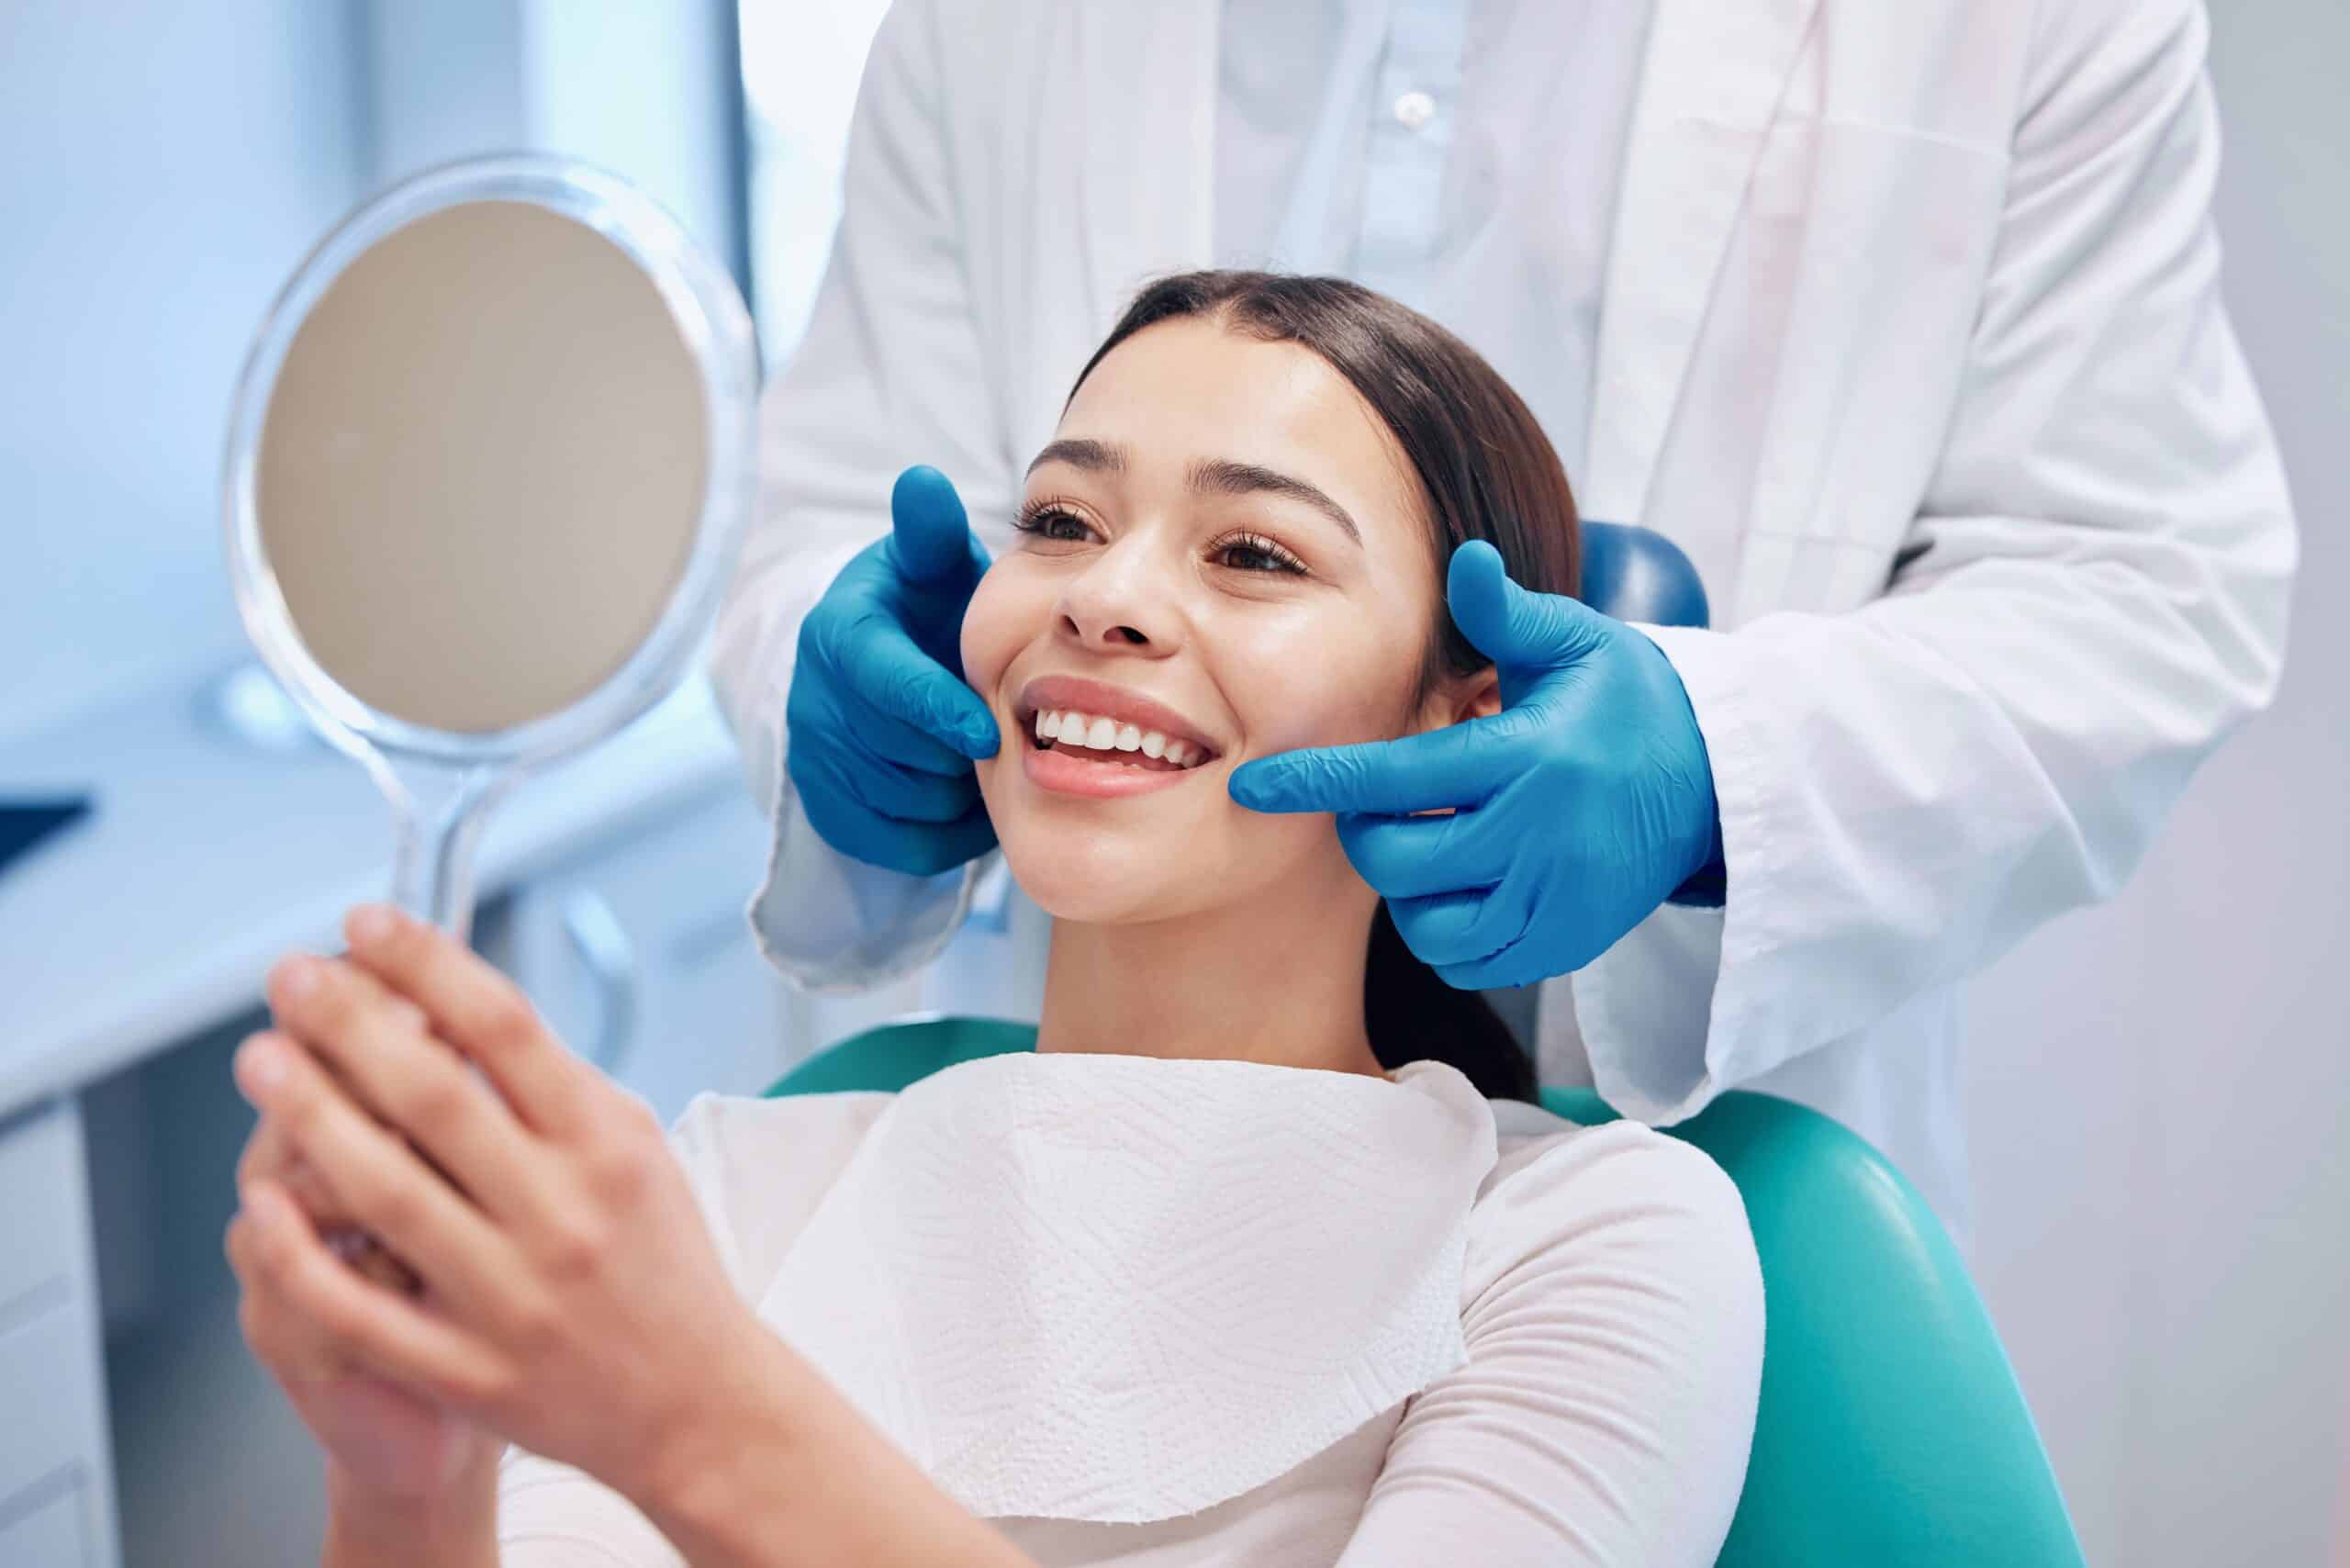 18 Questions to Ask Your Dentist At Your Next Appointment